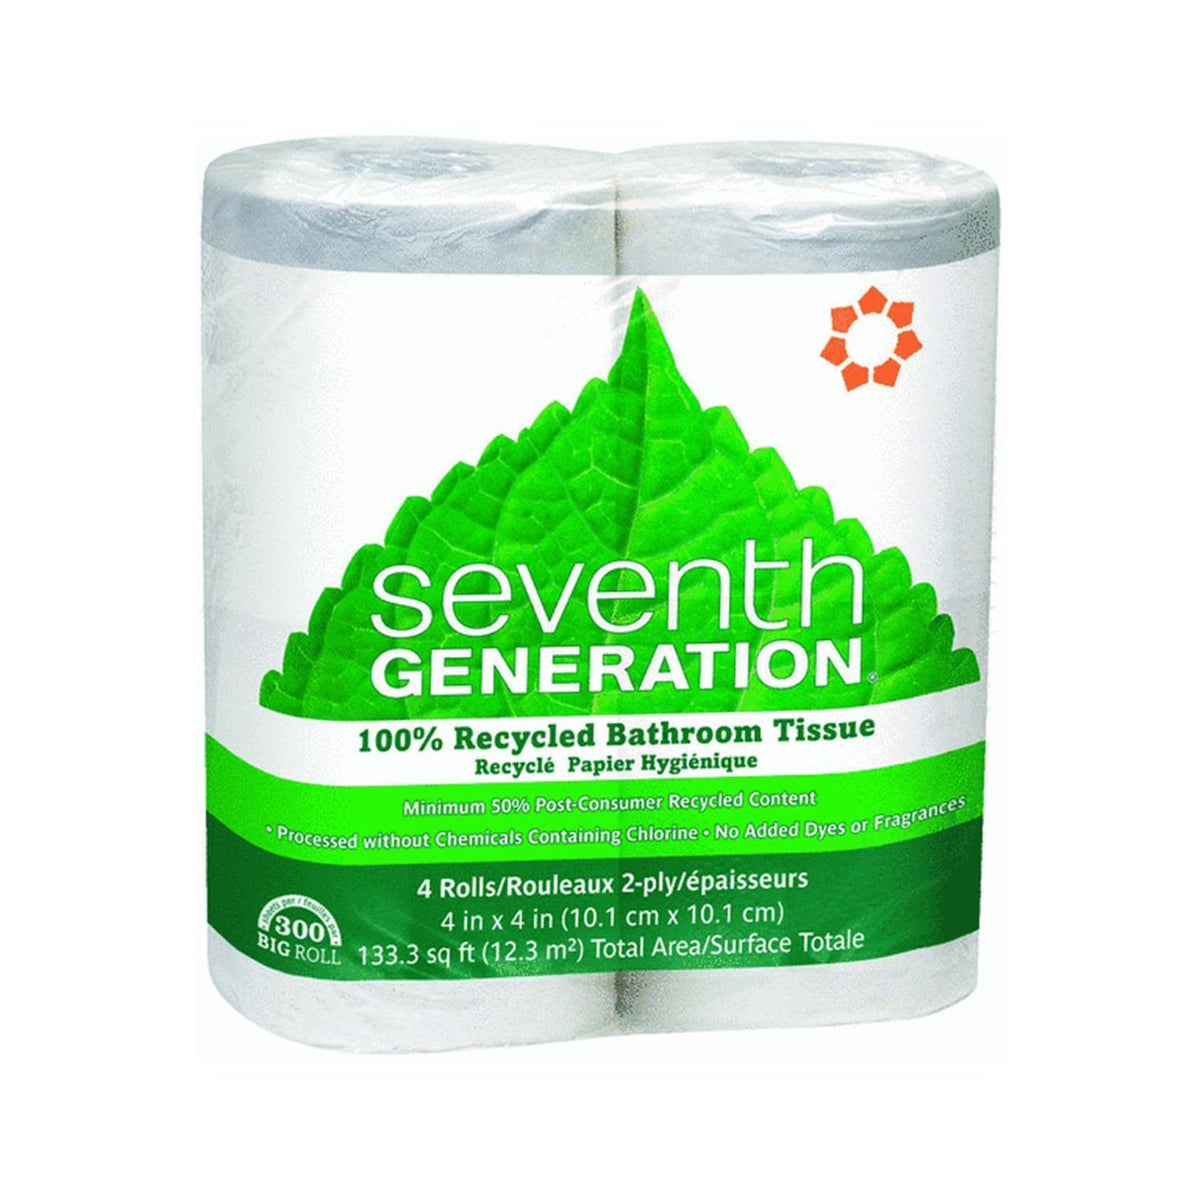 buy tissues at cheap rate in bulk. wholesale & retail home cleaning essentials store.